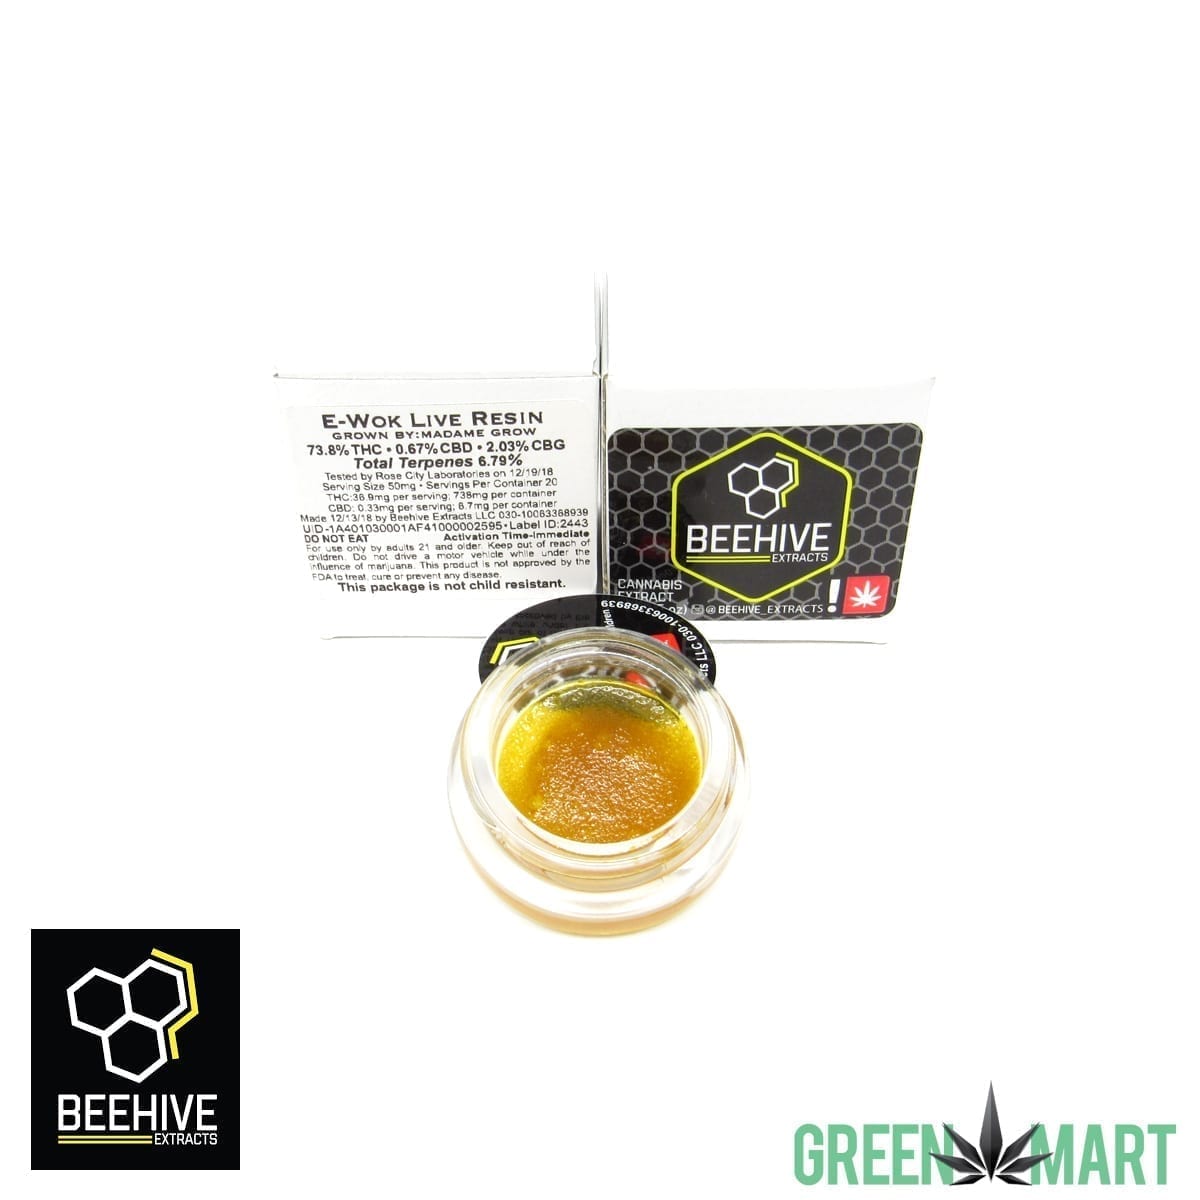 Beehive Extracts - e-Wok Live Resin